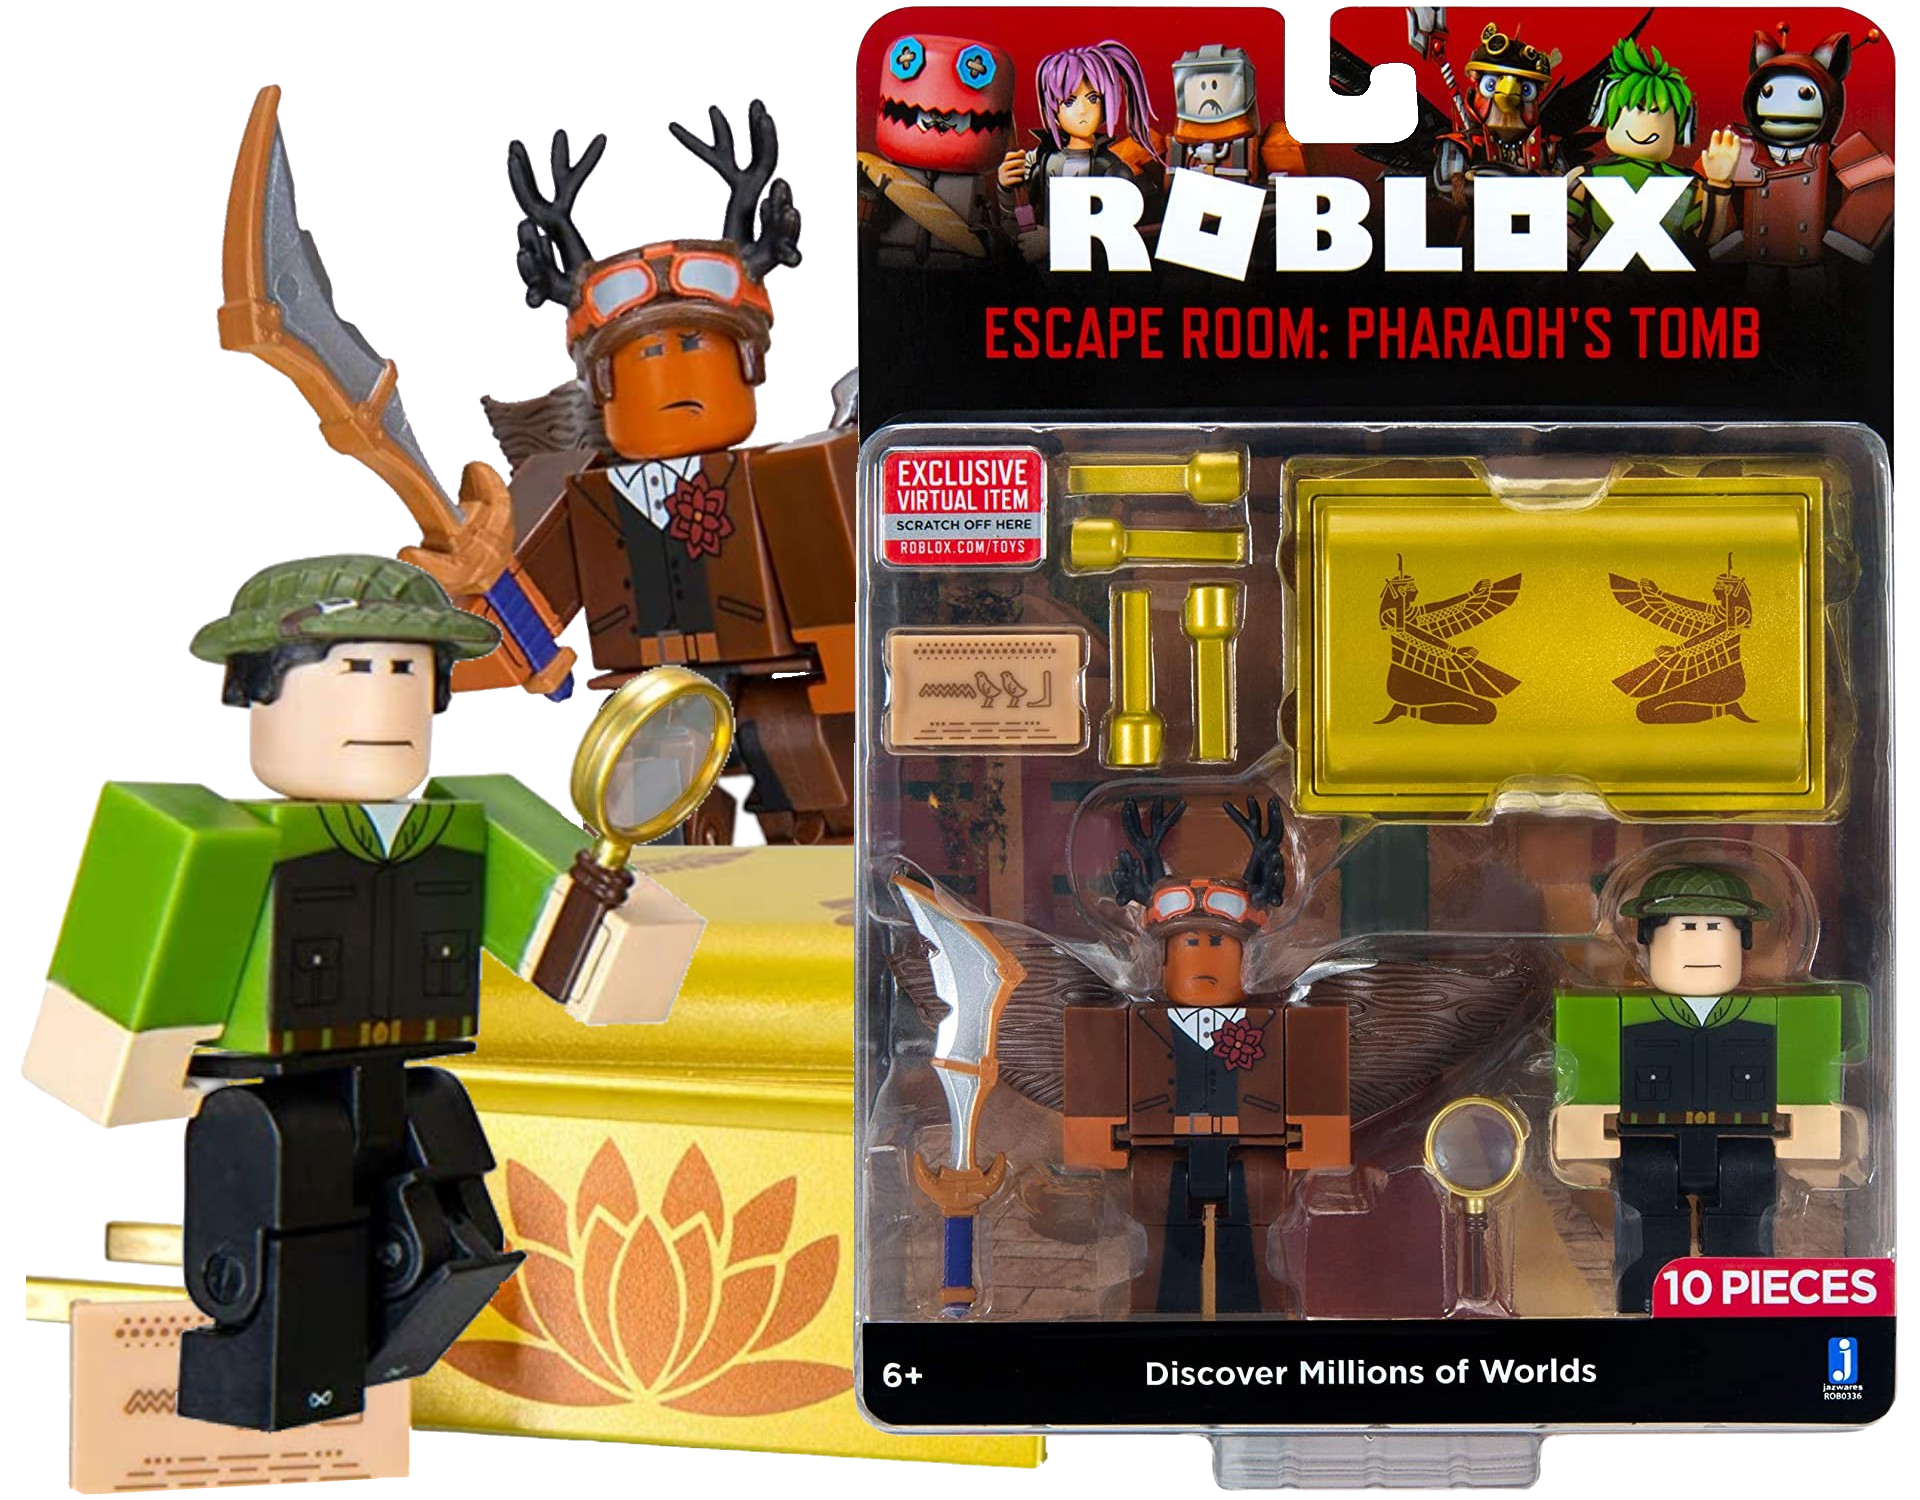 Escaperoom Gg The Ultimate Online Escape Room Experience - get roblox.gg